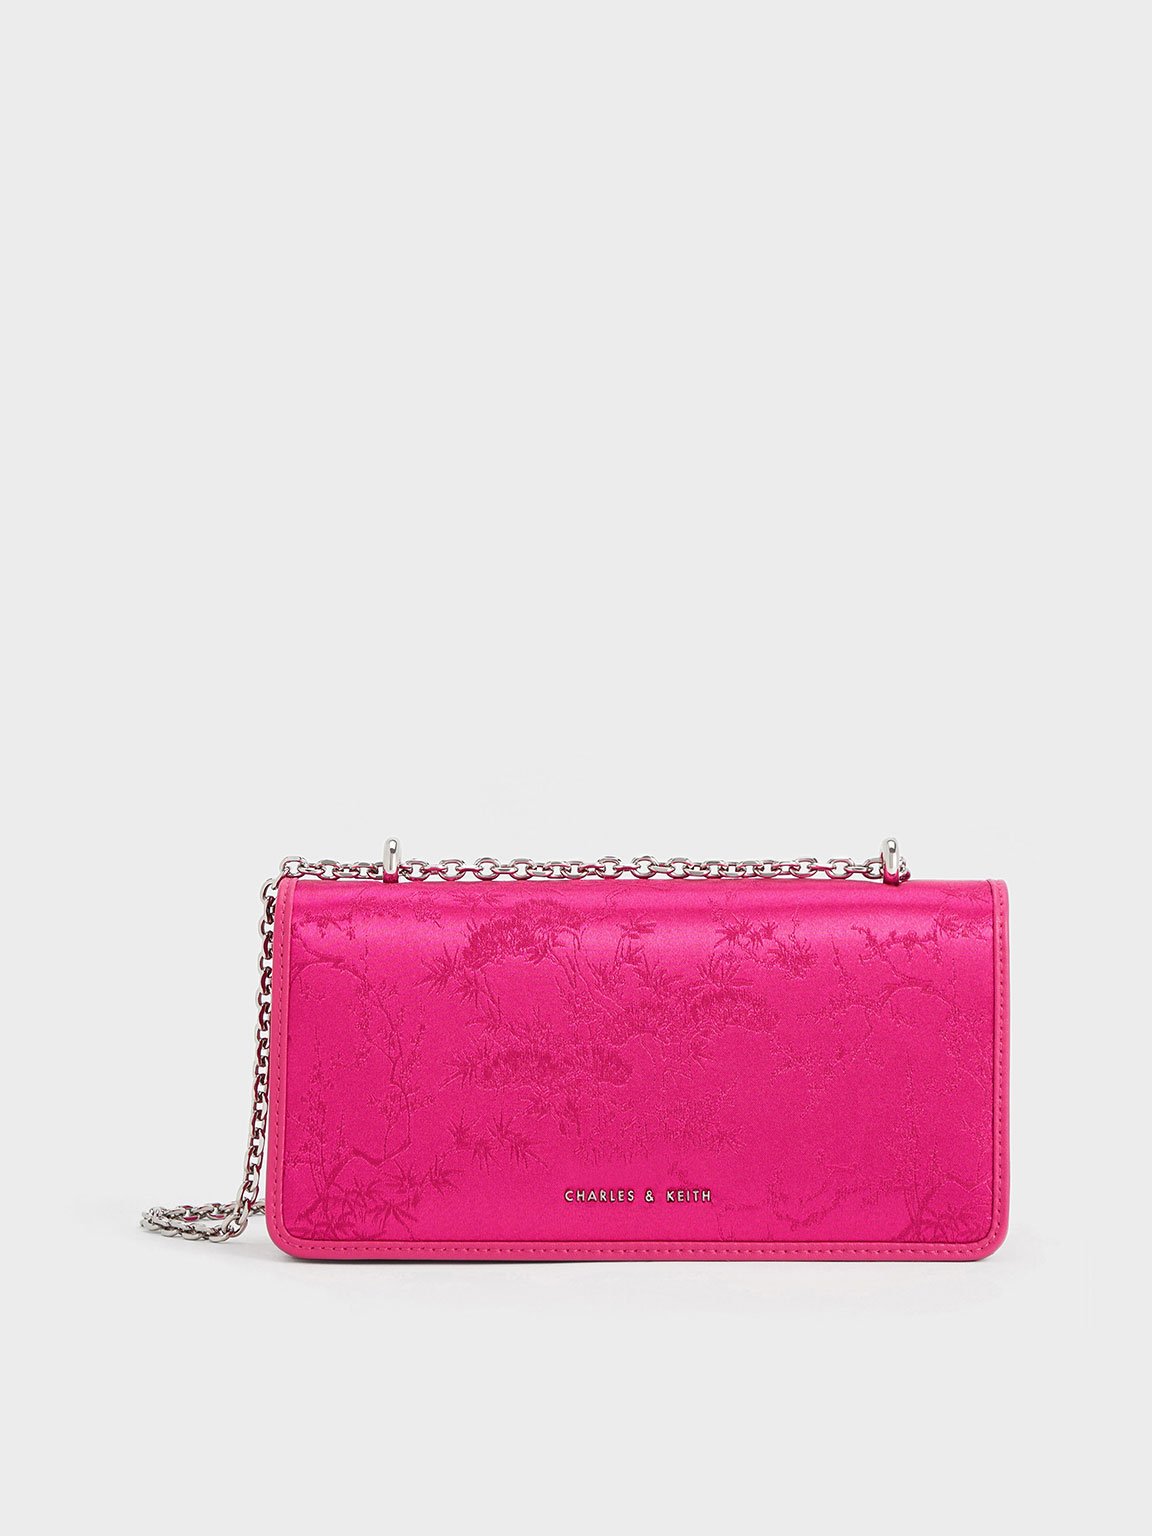 Charles & Keith Paffuto Recycled Satin Chain Handle Long Wallet In Fuchsia